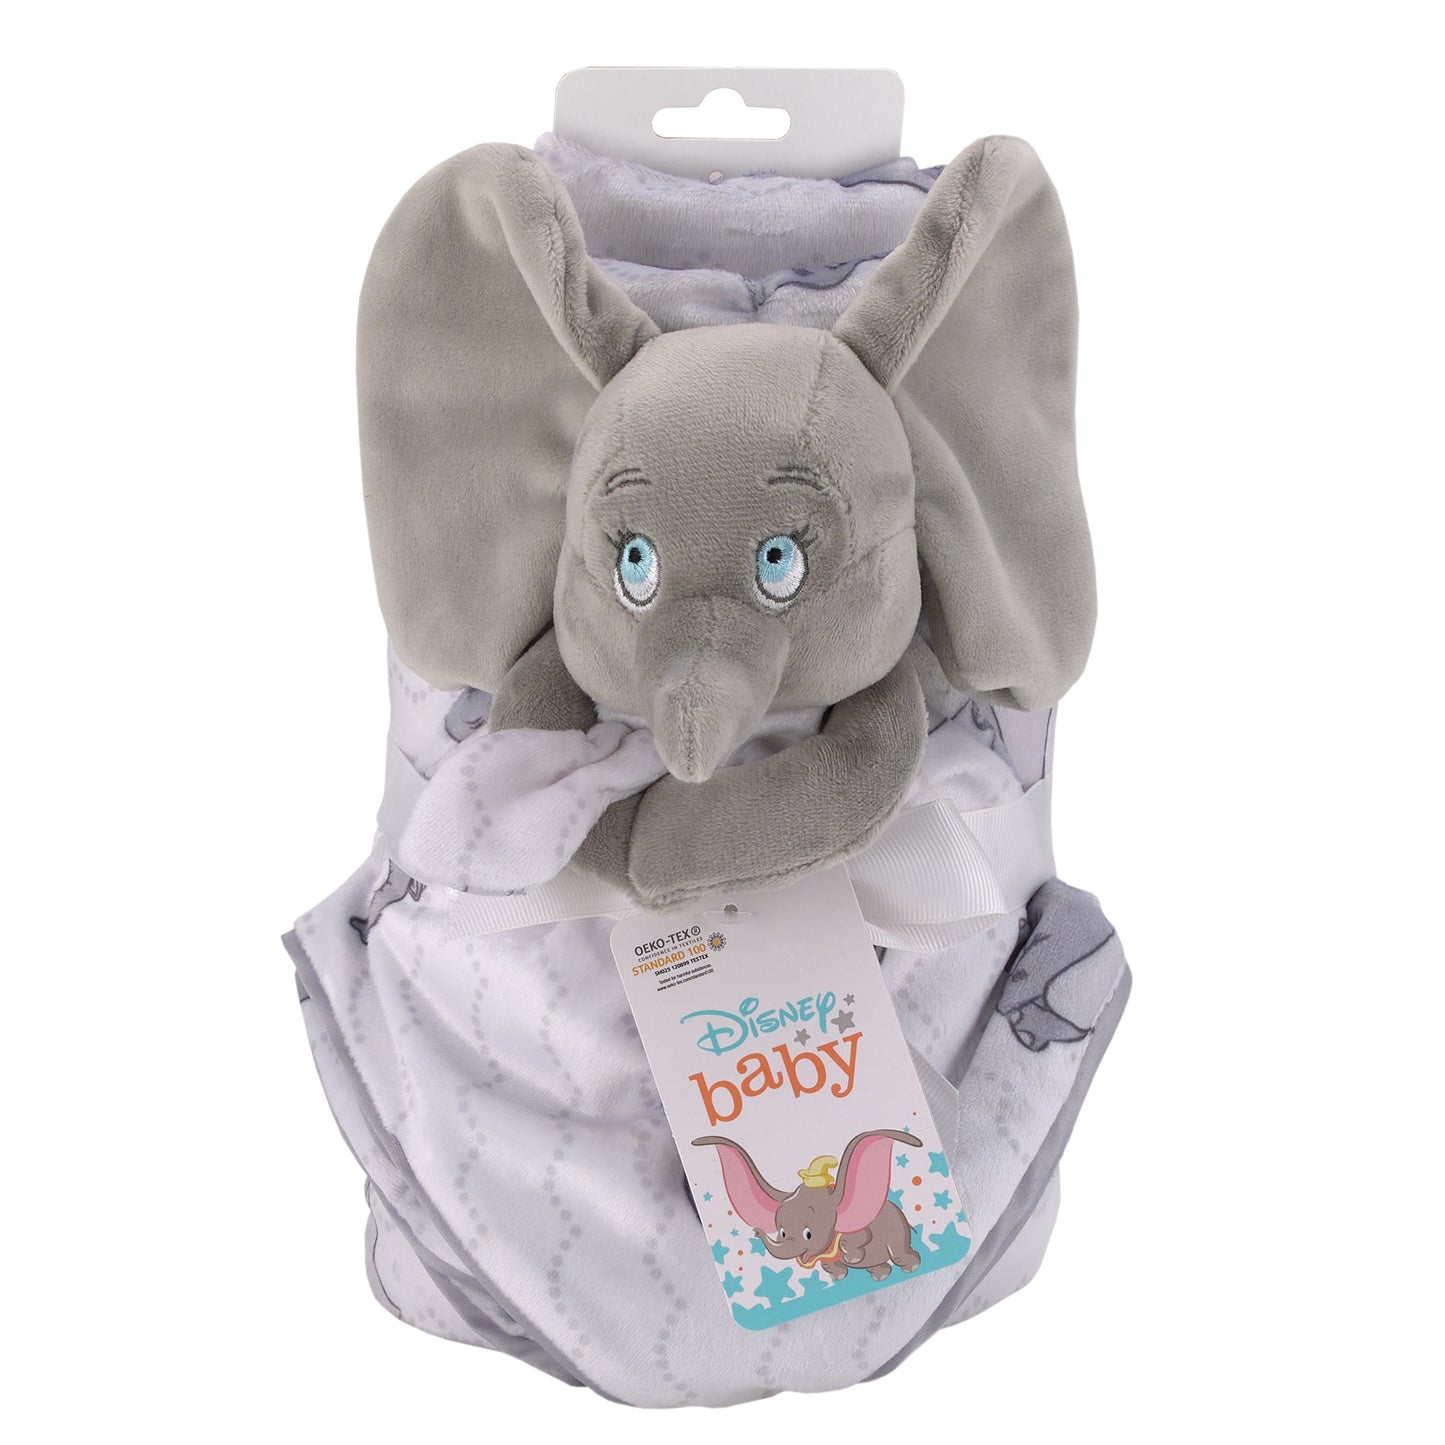 Disney Dumbo Gray and White Super Soft Sherpa Baby Blanket and Security Blanket 2-Piece Gift Set